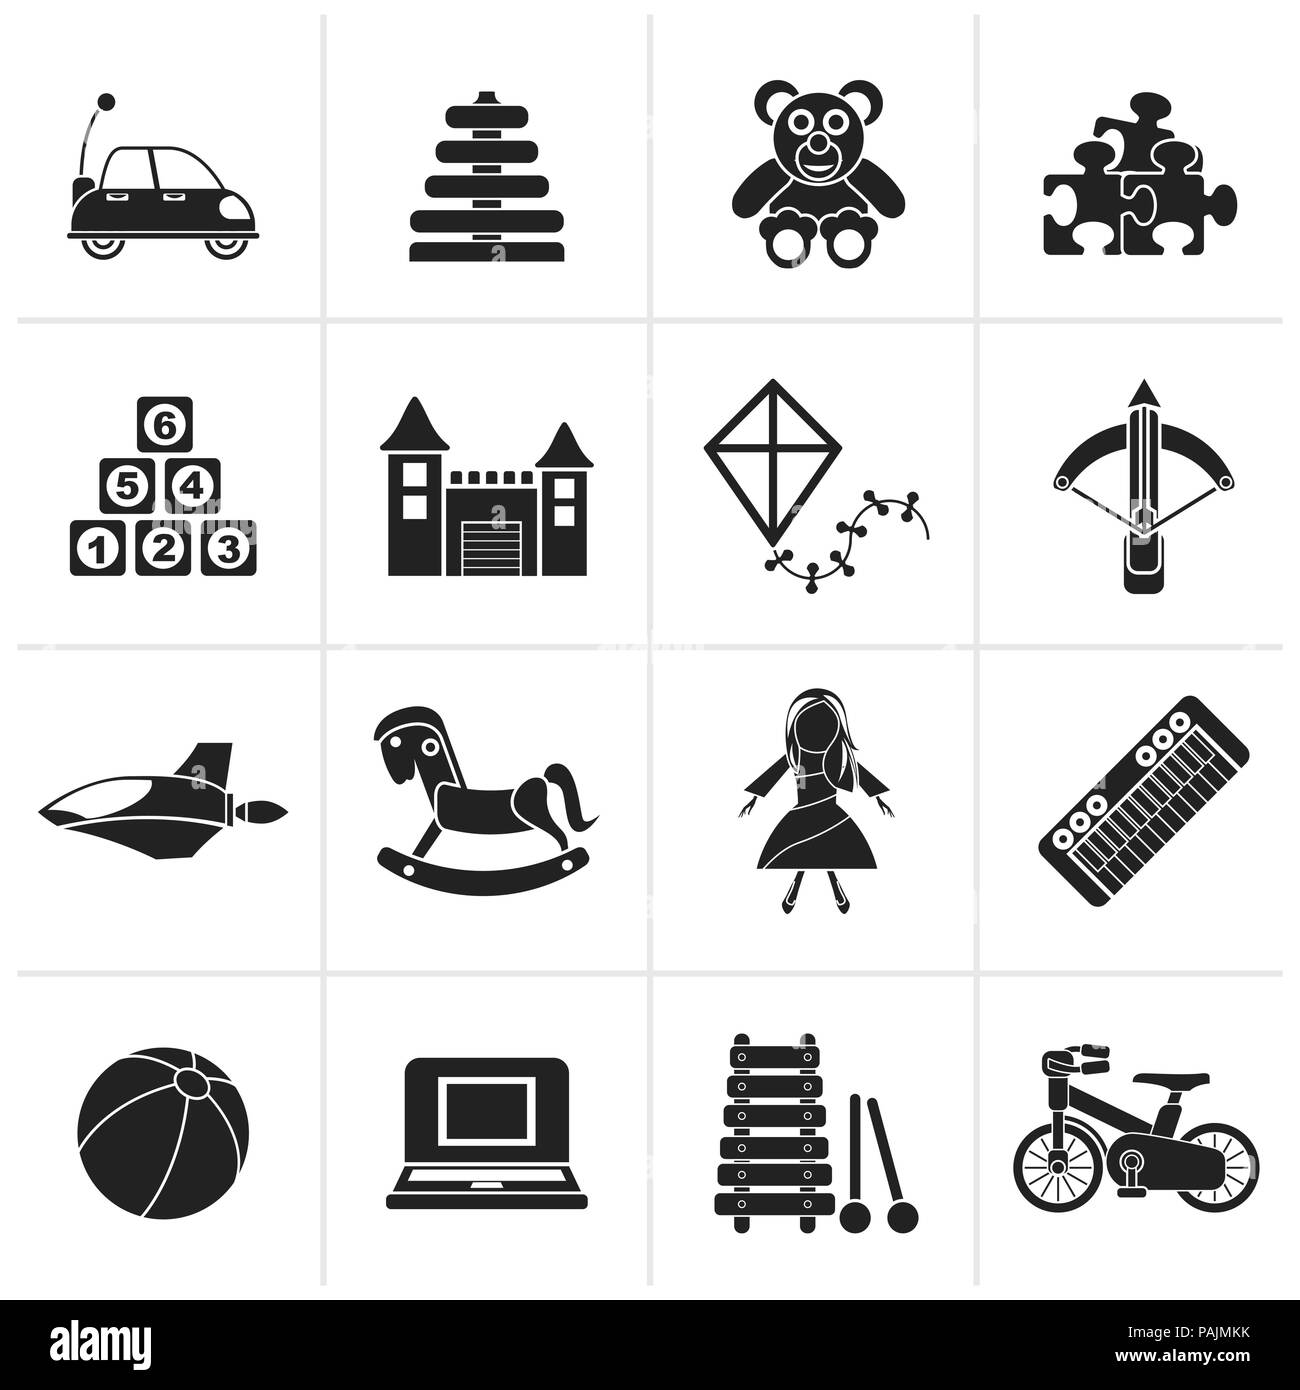 Black different kind of toys icons - vector icon set Stock Vector